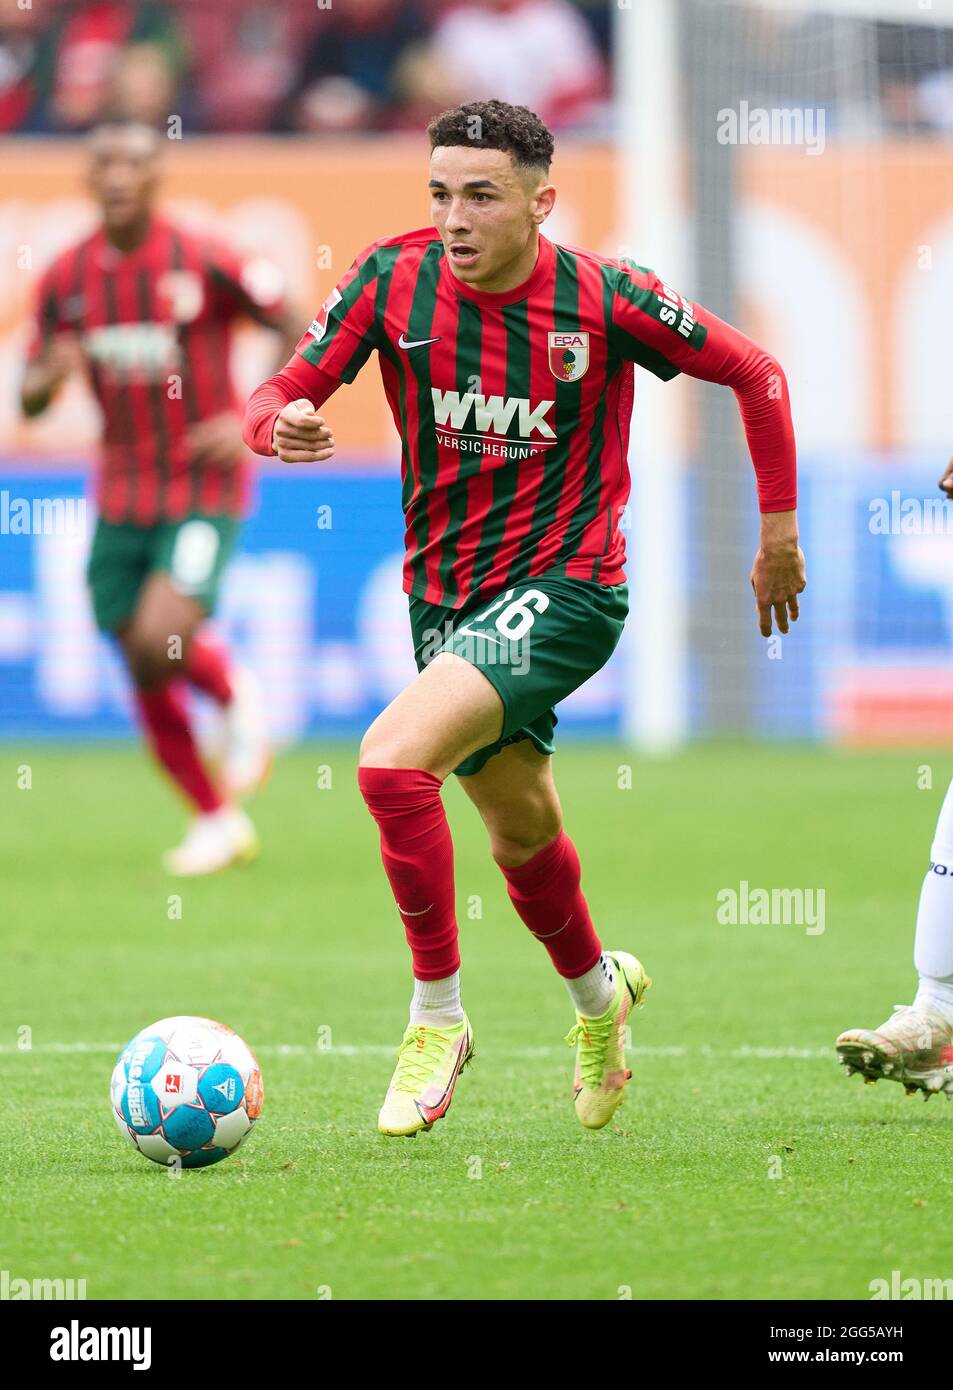 Ruben VARGAS, FCA 16  in the match FC AUGSBURG - BAYER 04 LEVERKUSEN 1-4 1.German Football League on August 28, 2021 in Augsburg, Germany  Season 2021/2022, matchday 3, 1.Bundesliga, 3.Spieltag. © Peter Schatz / Alamy Live News    - DFL REGULATIONS PROHIBIT ANY USE OF PHOTOGRAPHS as IMAGE SEQUENCES and/or QUASI-VIDEO - Stock Photo